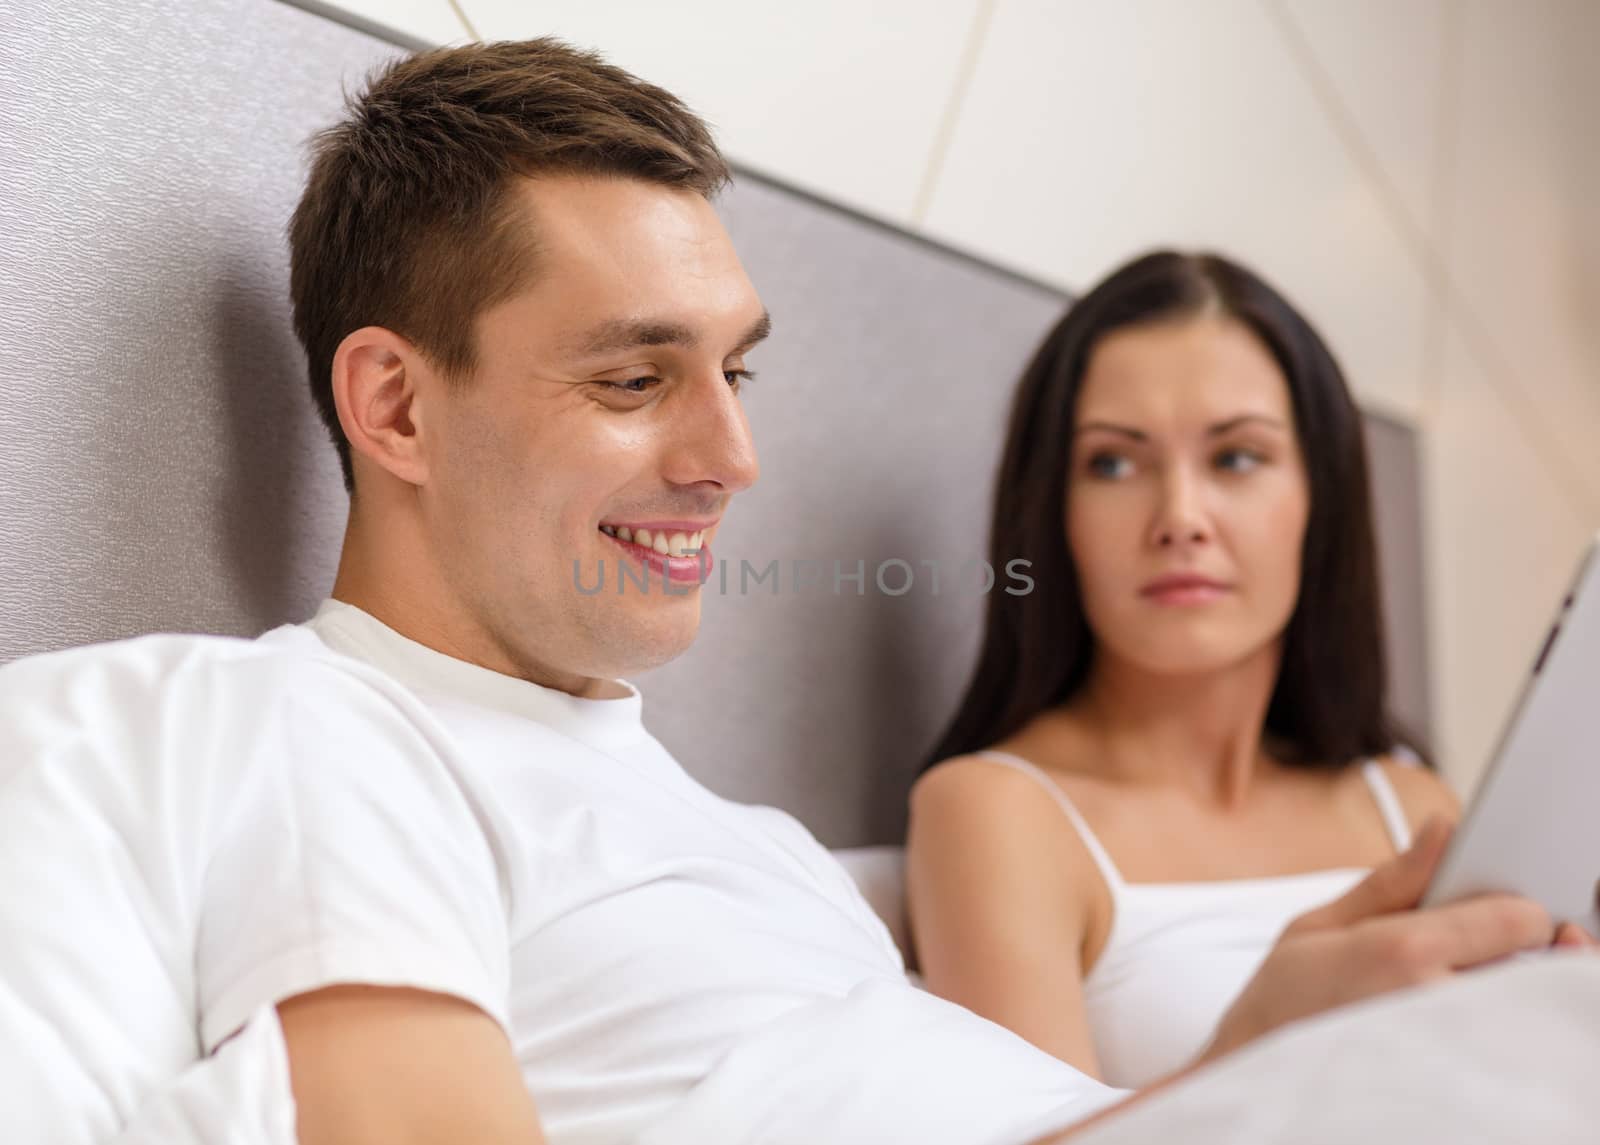 hotel, travel, relationships, technology, intermet and happiness concept - smiling couple in bed with tablet computer